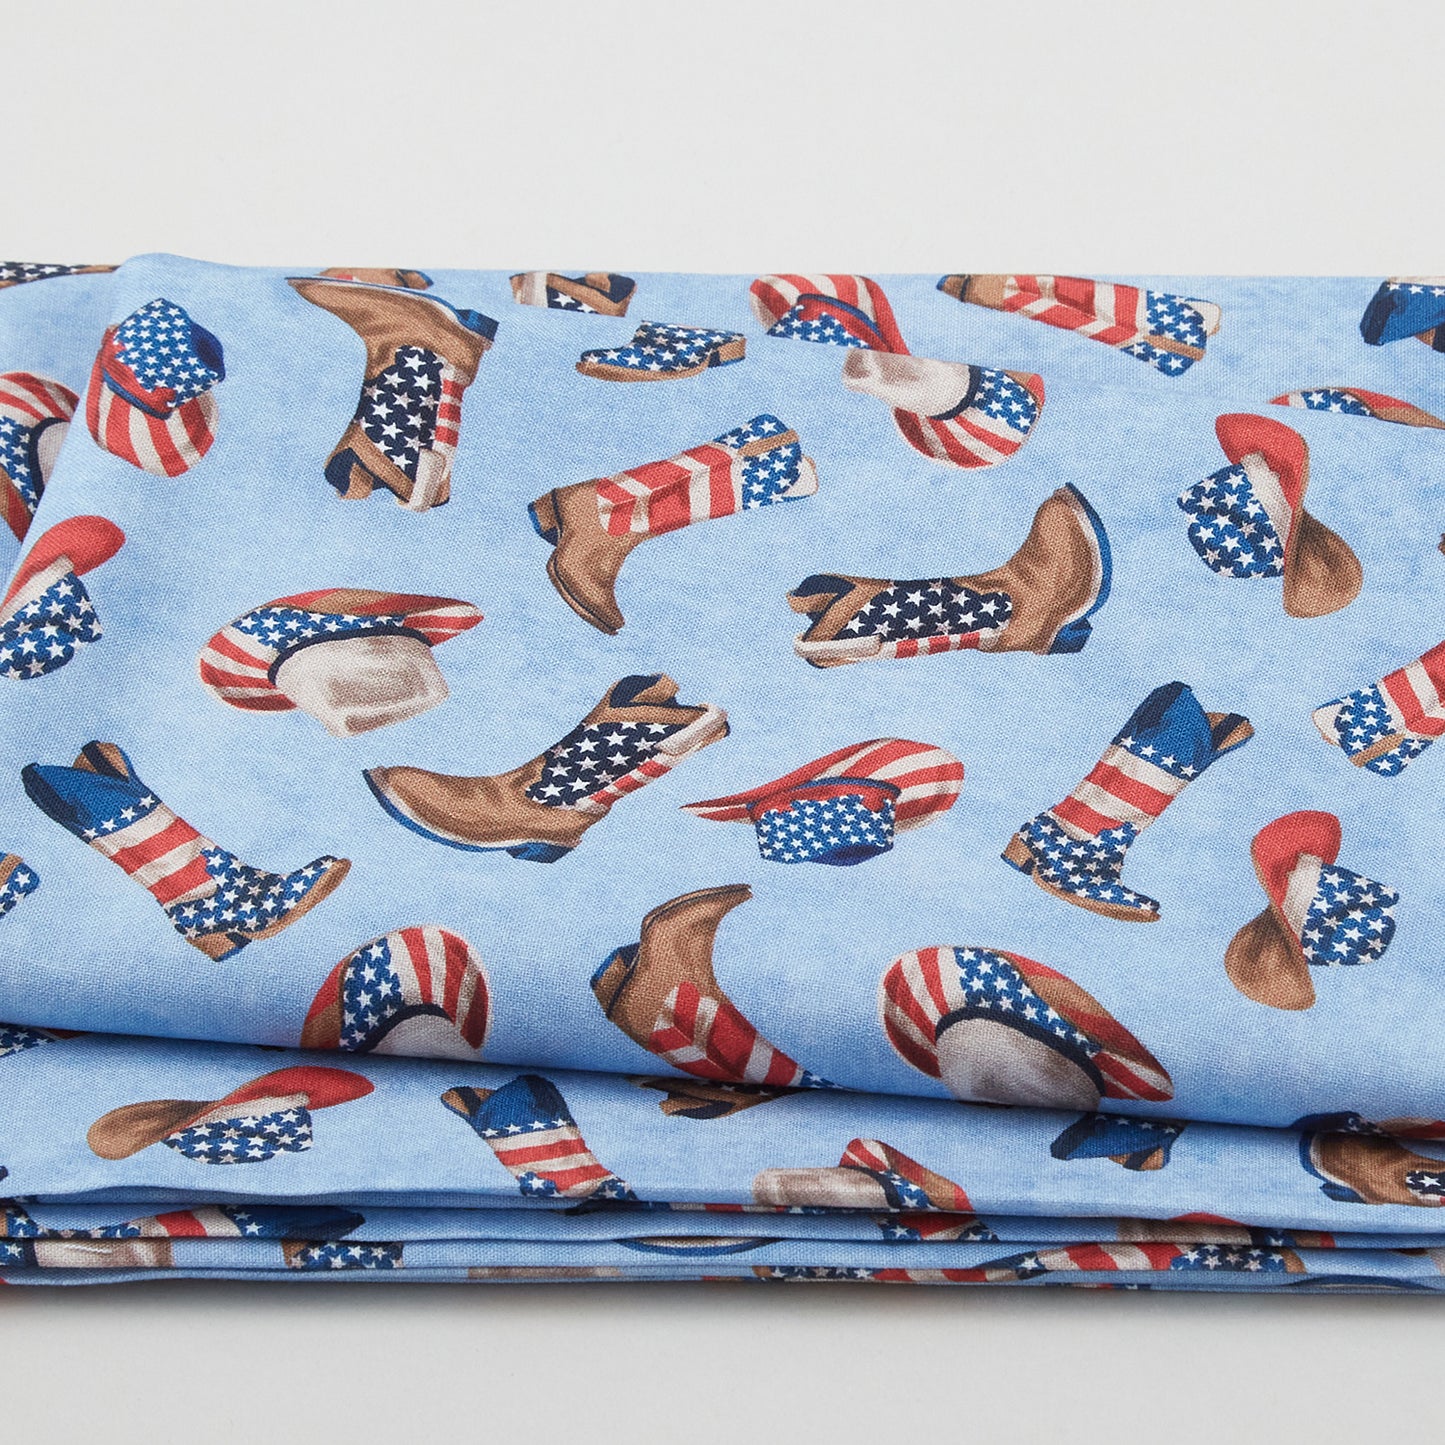 All American - Hats and Boots Blue 2 Yard Cut Primary Image